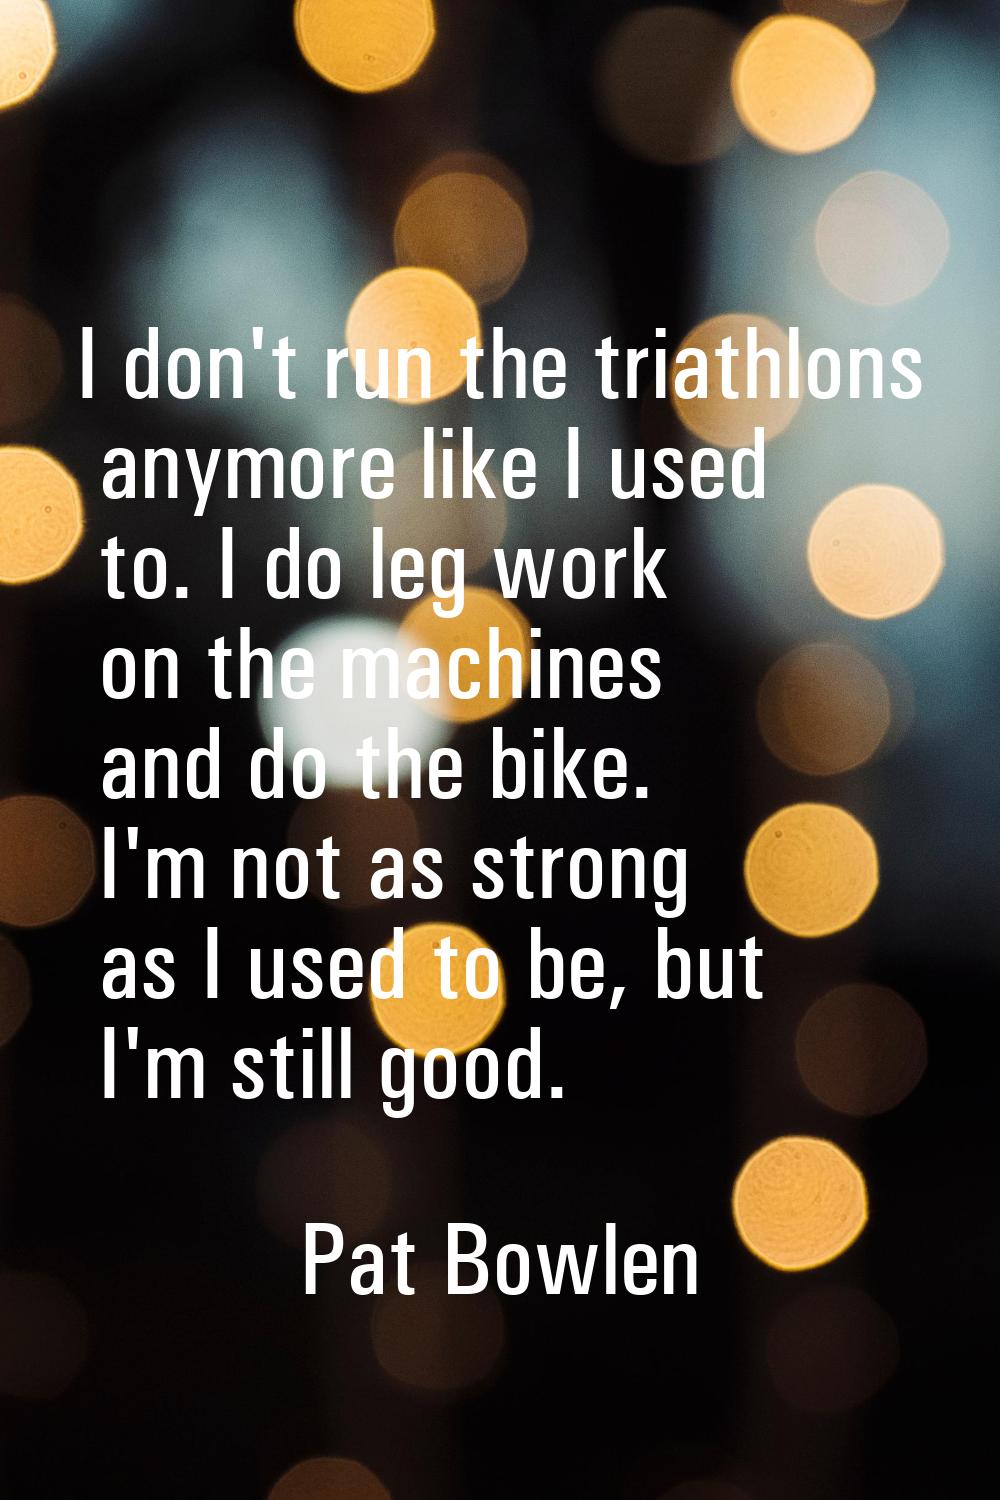 I don't run the triathlons anymore like I used to. I do leg work on the machines and do the bike. I